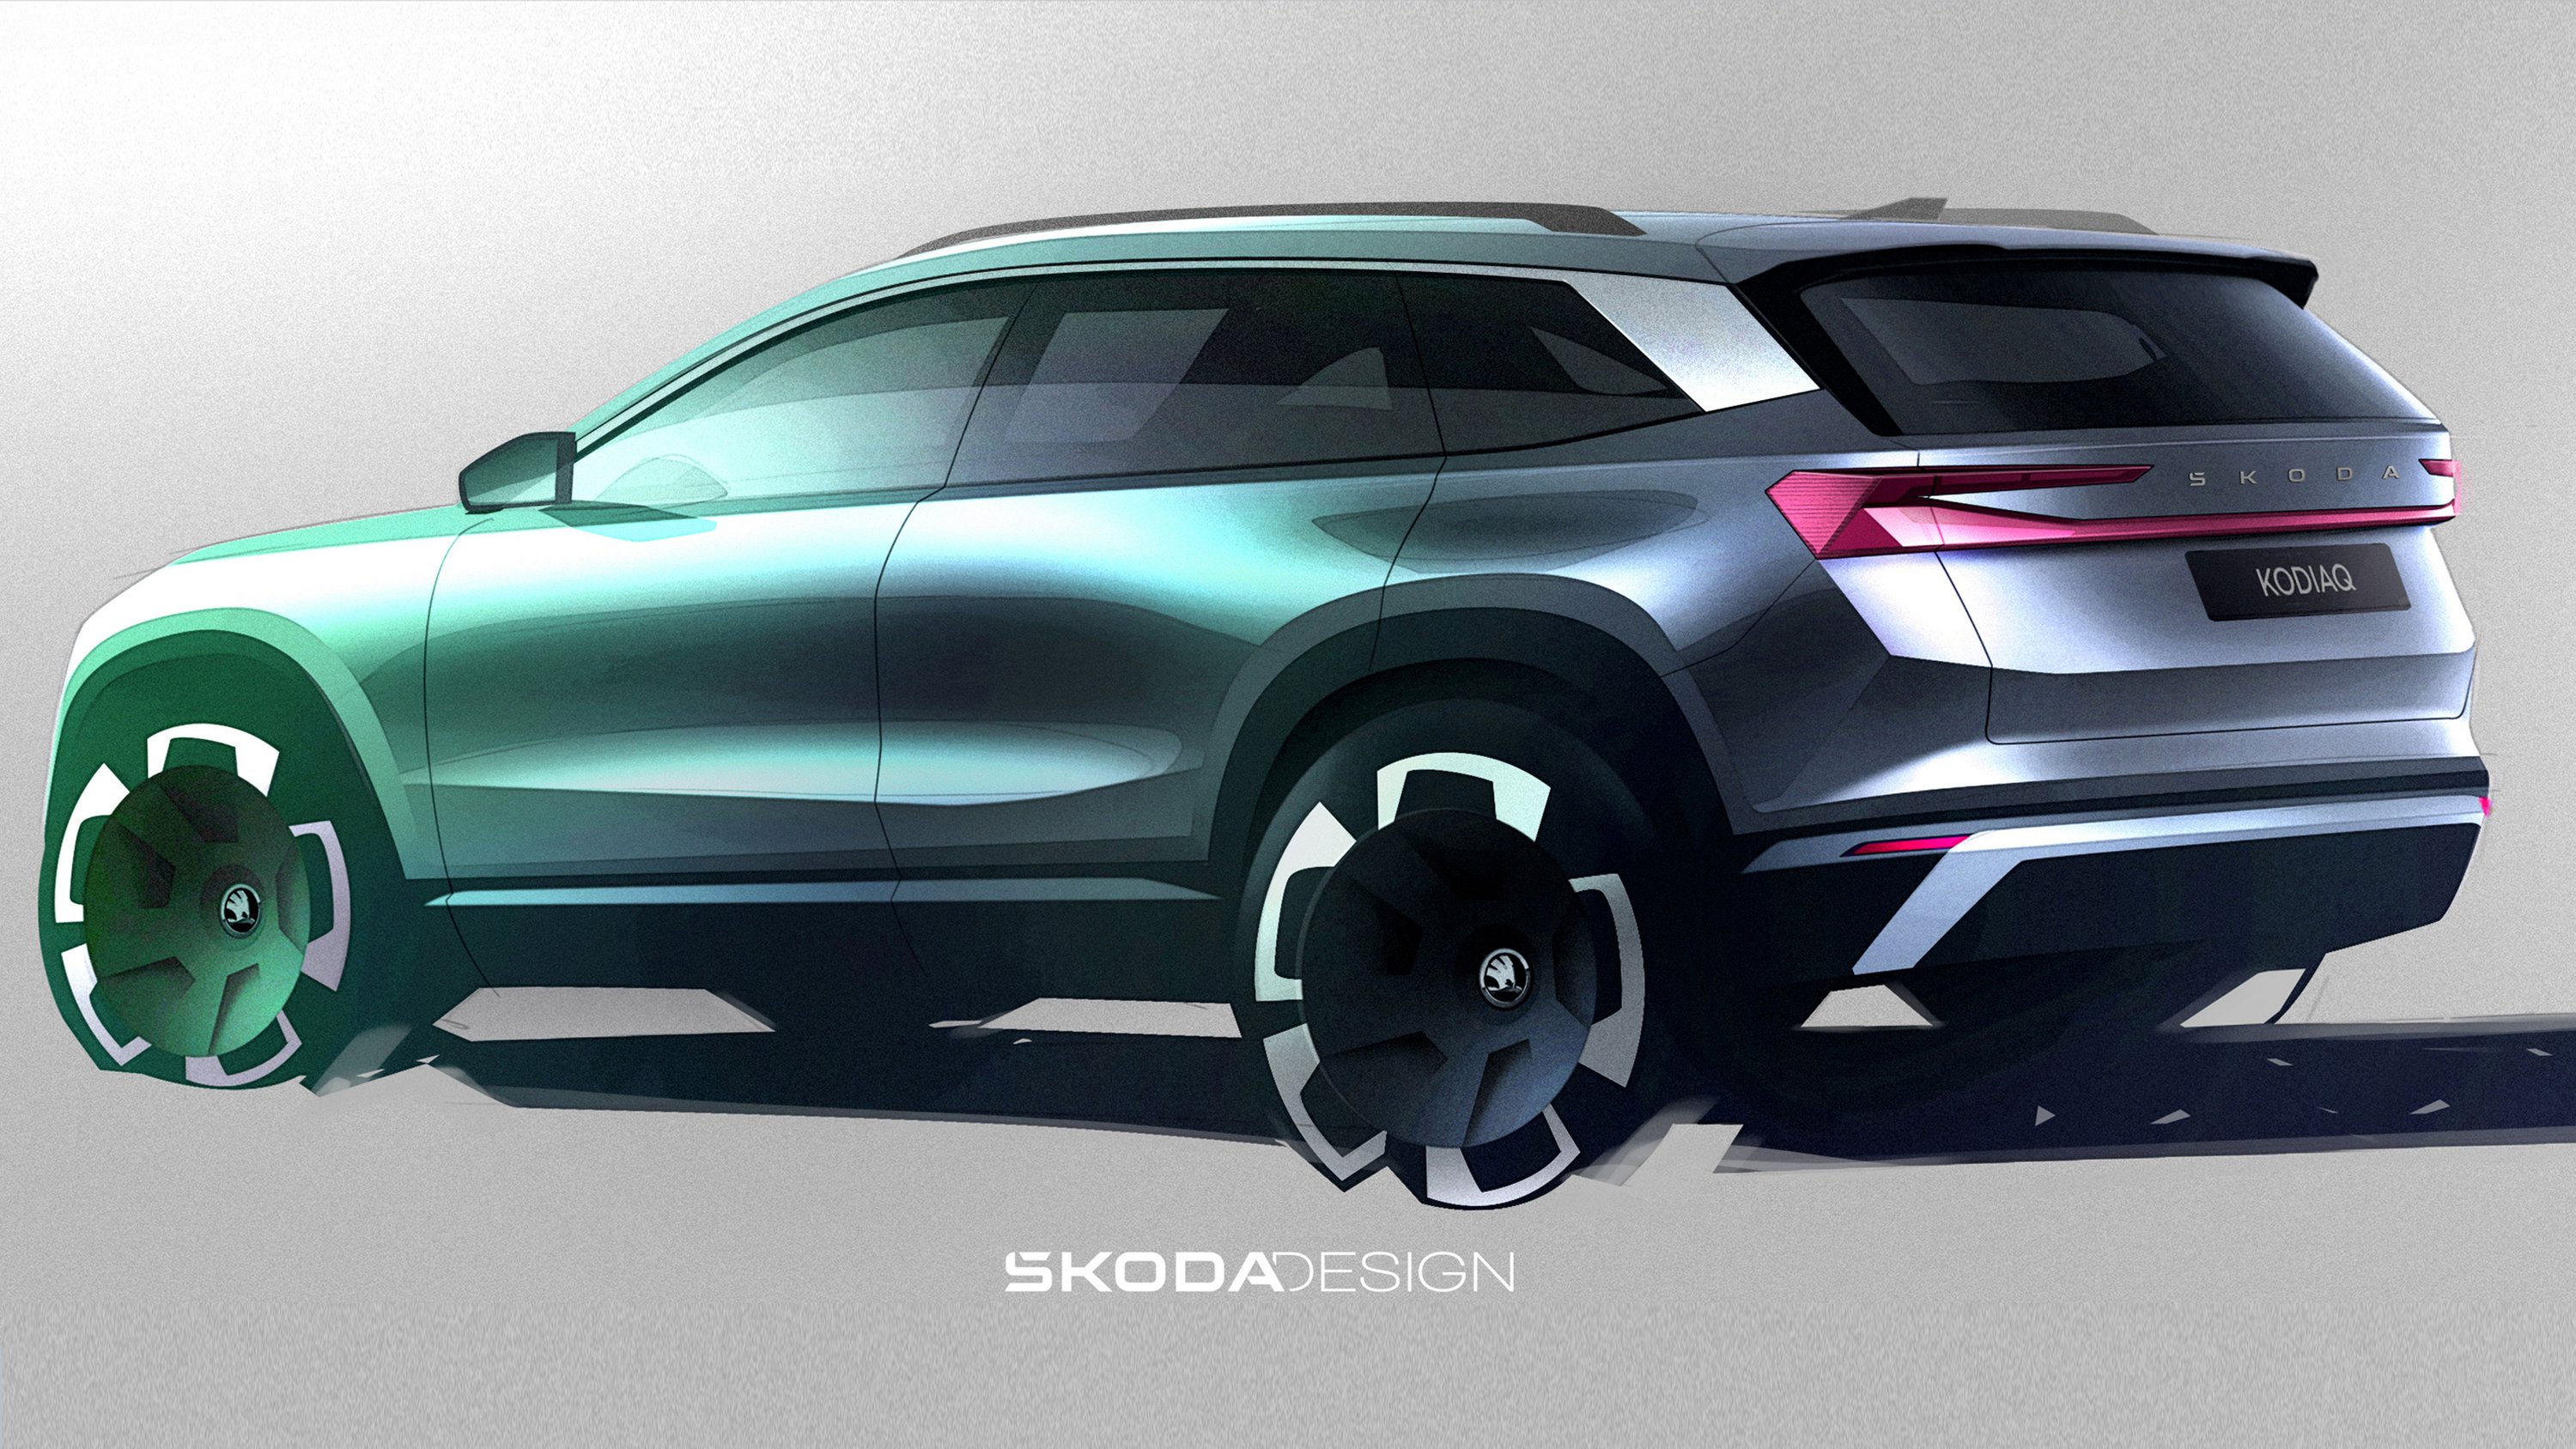 The first images show the new seven-seater Skoda 6